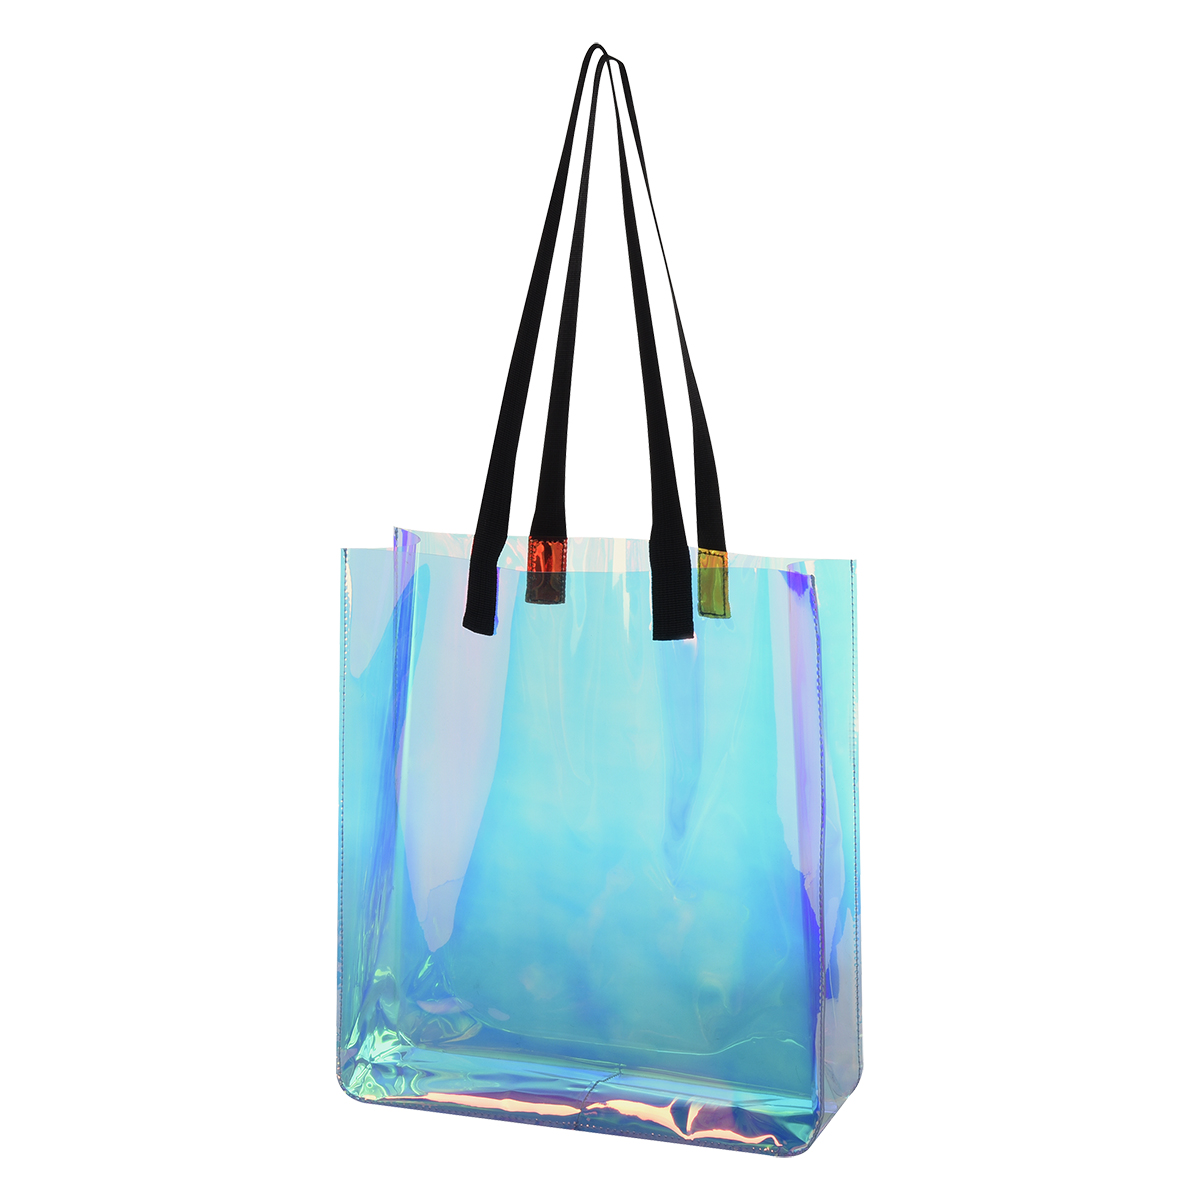 Iridescent Tote Bag - PVC - 2 Sizes Available from Apollo Box